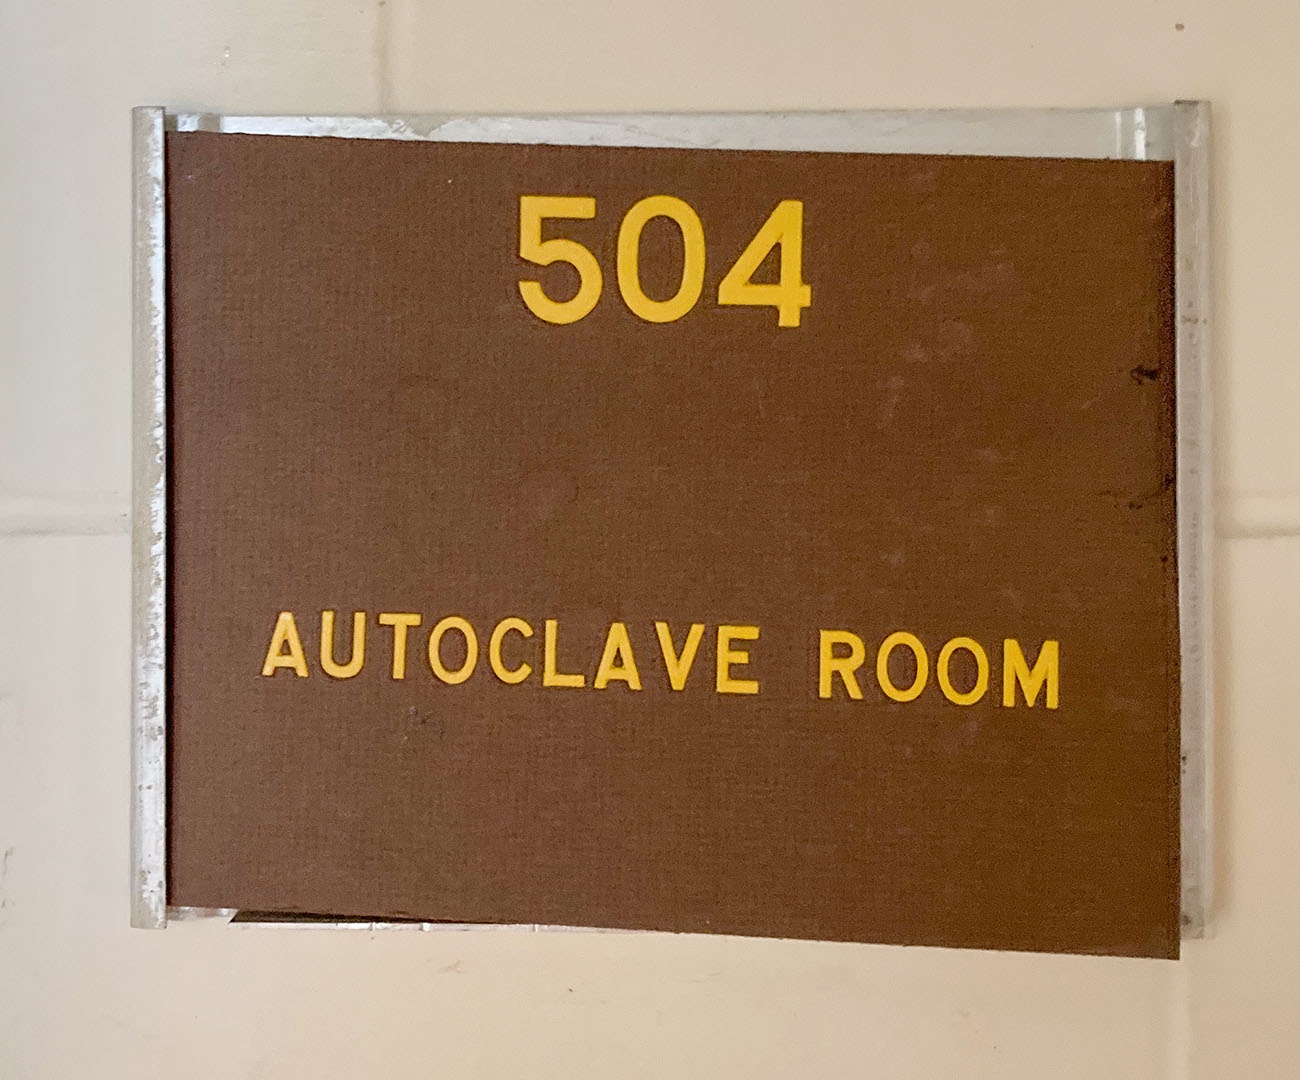 A yellow and brown sign with room number 504 and autoclave room on it, in an aluminum rectangular holder